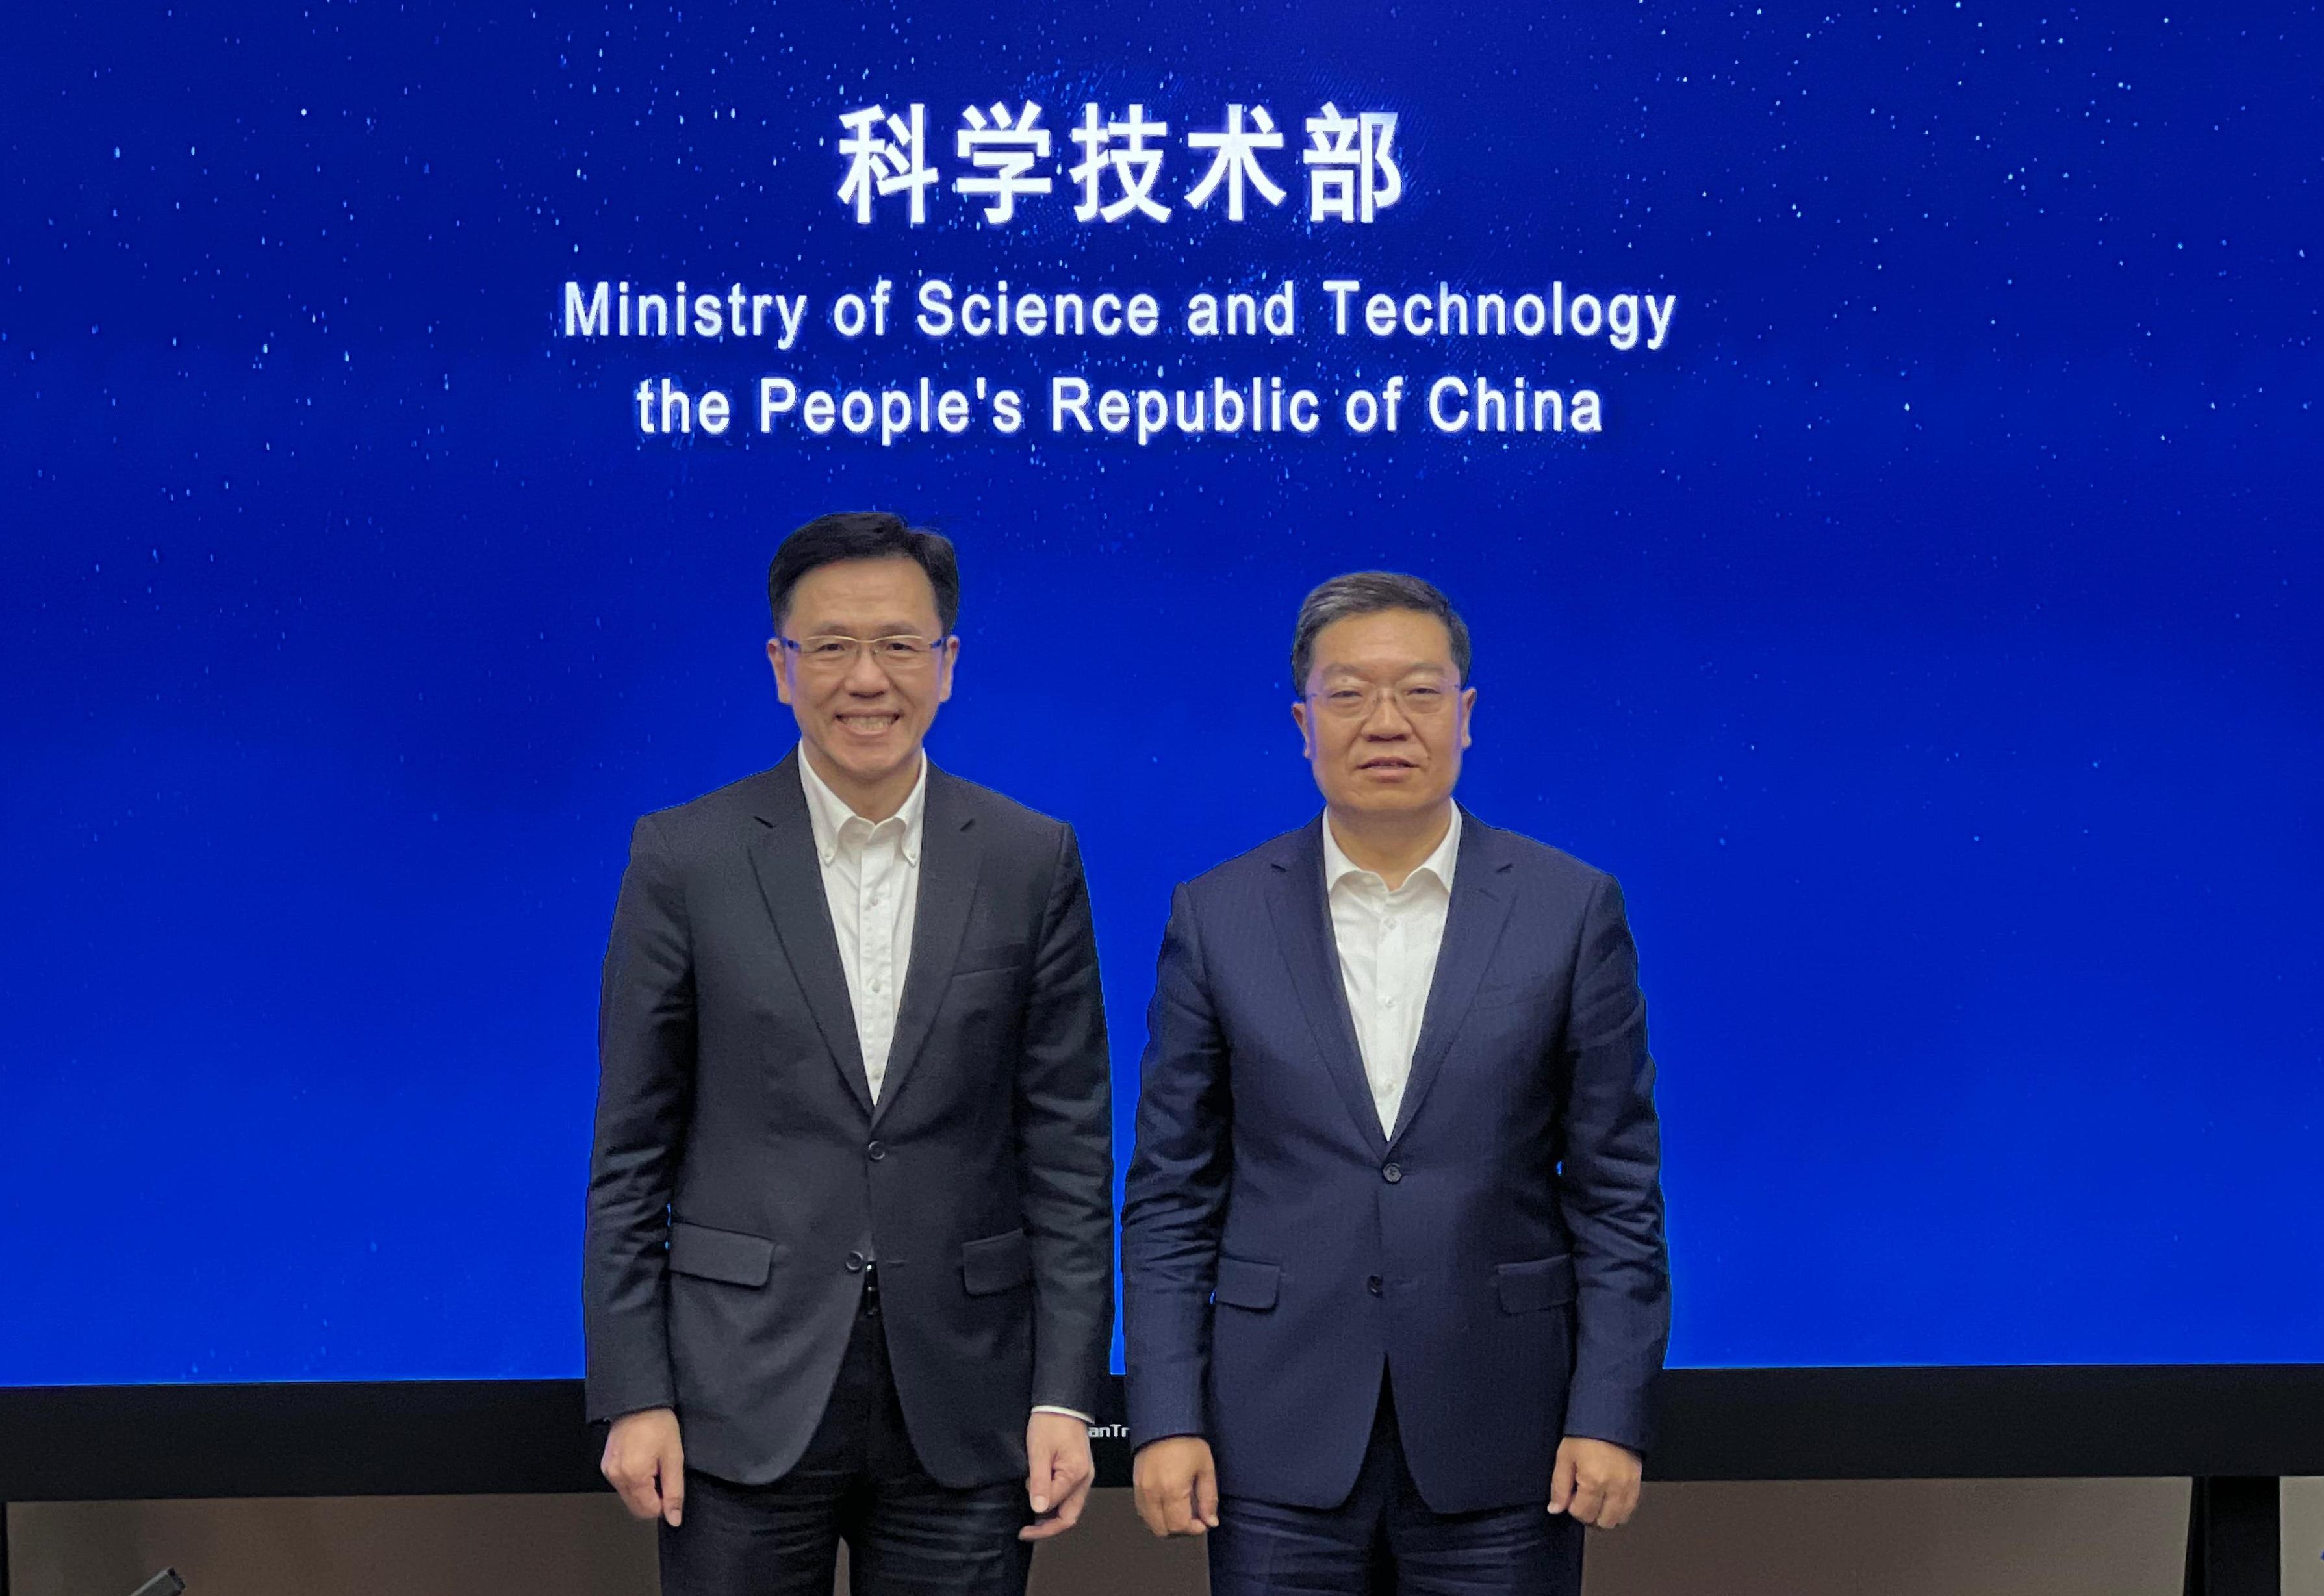 The Secretary for Innovation, Technology and Industry, Professor Sun Dong (left), visited the Ministry of Science and Technology in Beijing today (May 9) and met with Vice Minister of Science and Technology Mr Chen Jiachang (right).